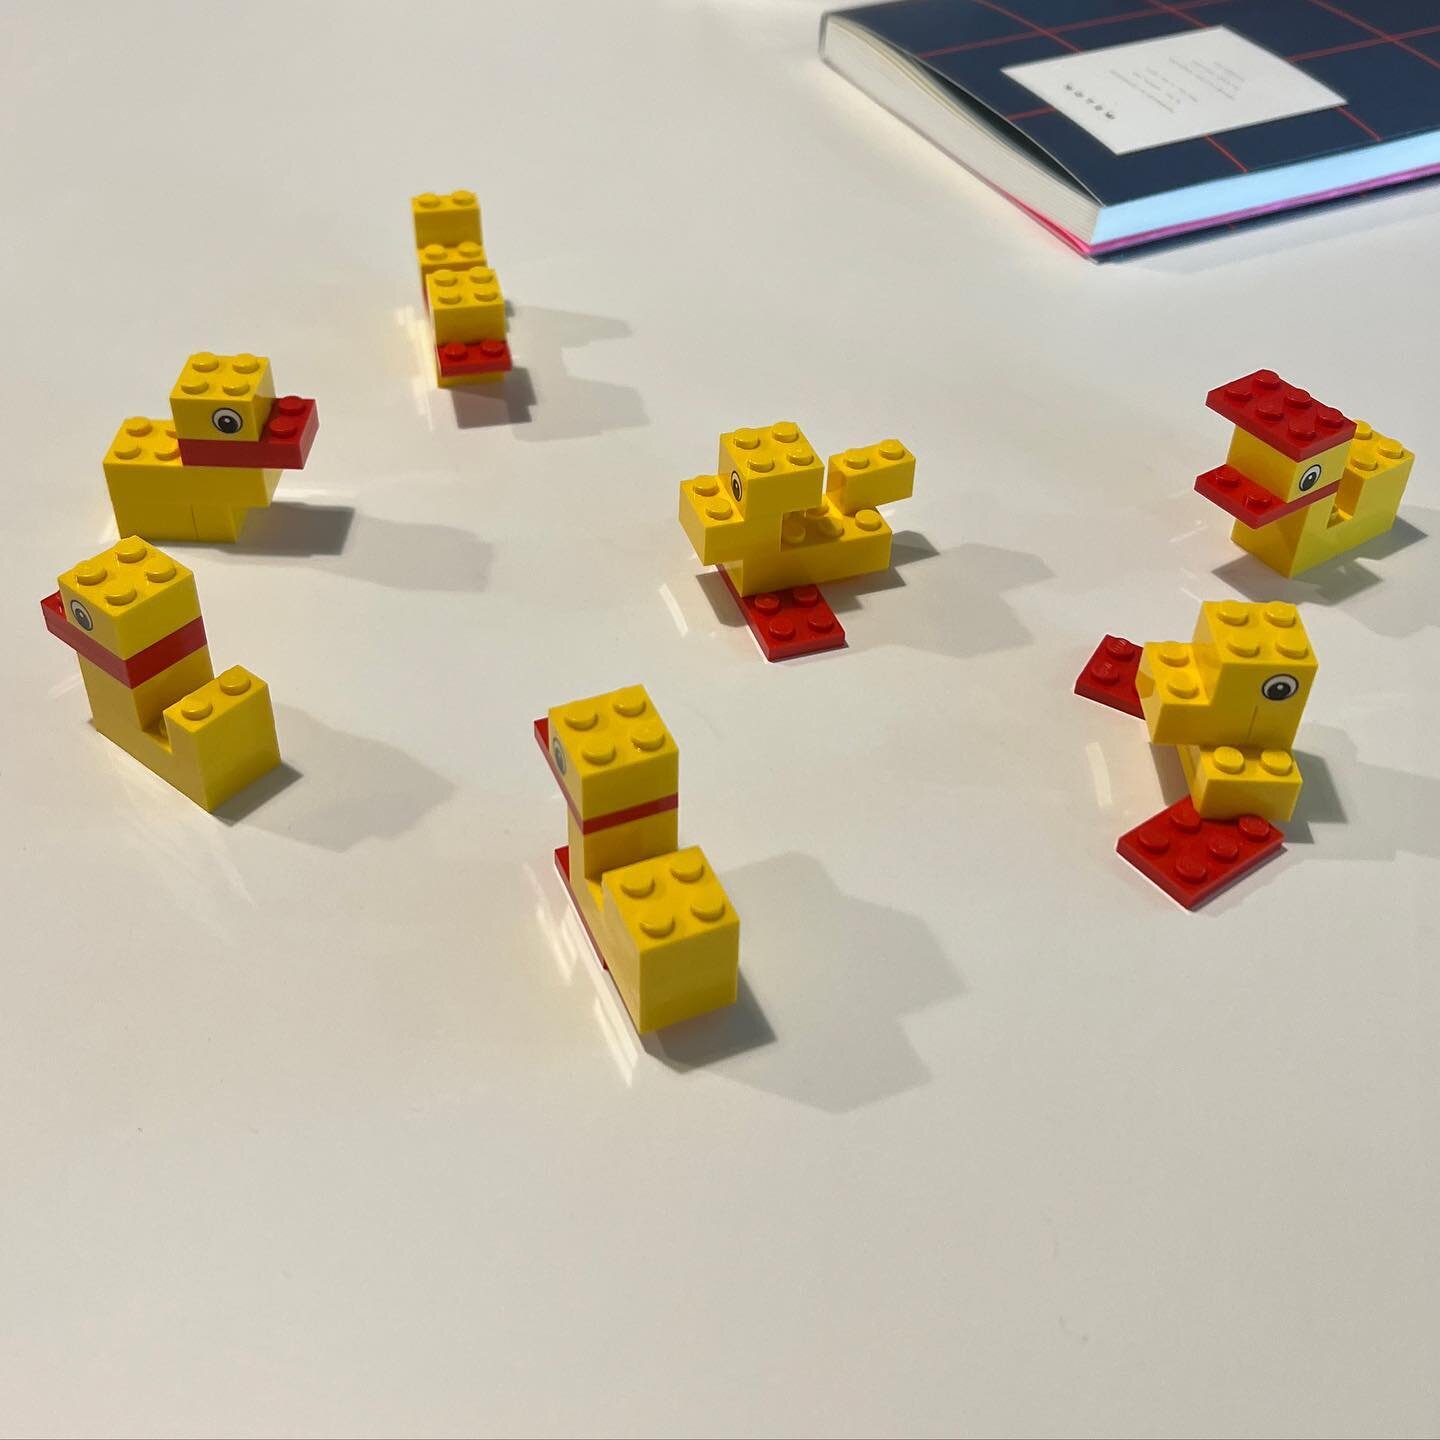 Our first meeting facilitation of 2023 is in the books. We had an amazing time with the team at @3x3_design and covered a variety of internal and external challenges and opportunities. We brought out the #legoduckchallenge to kick-off the day @wirewo